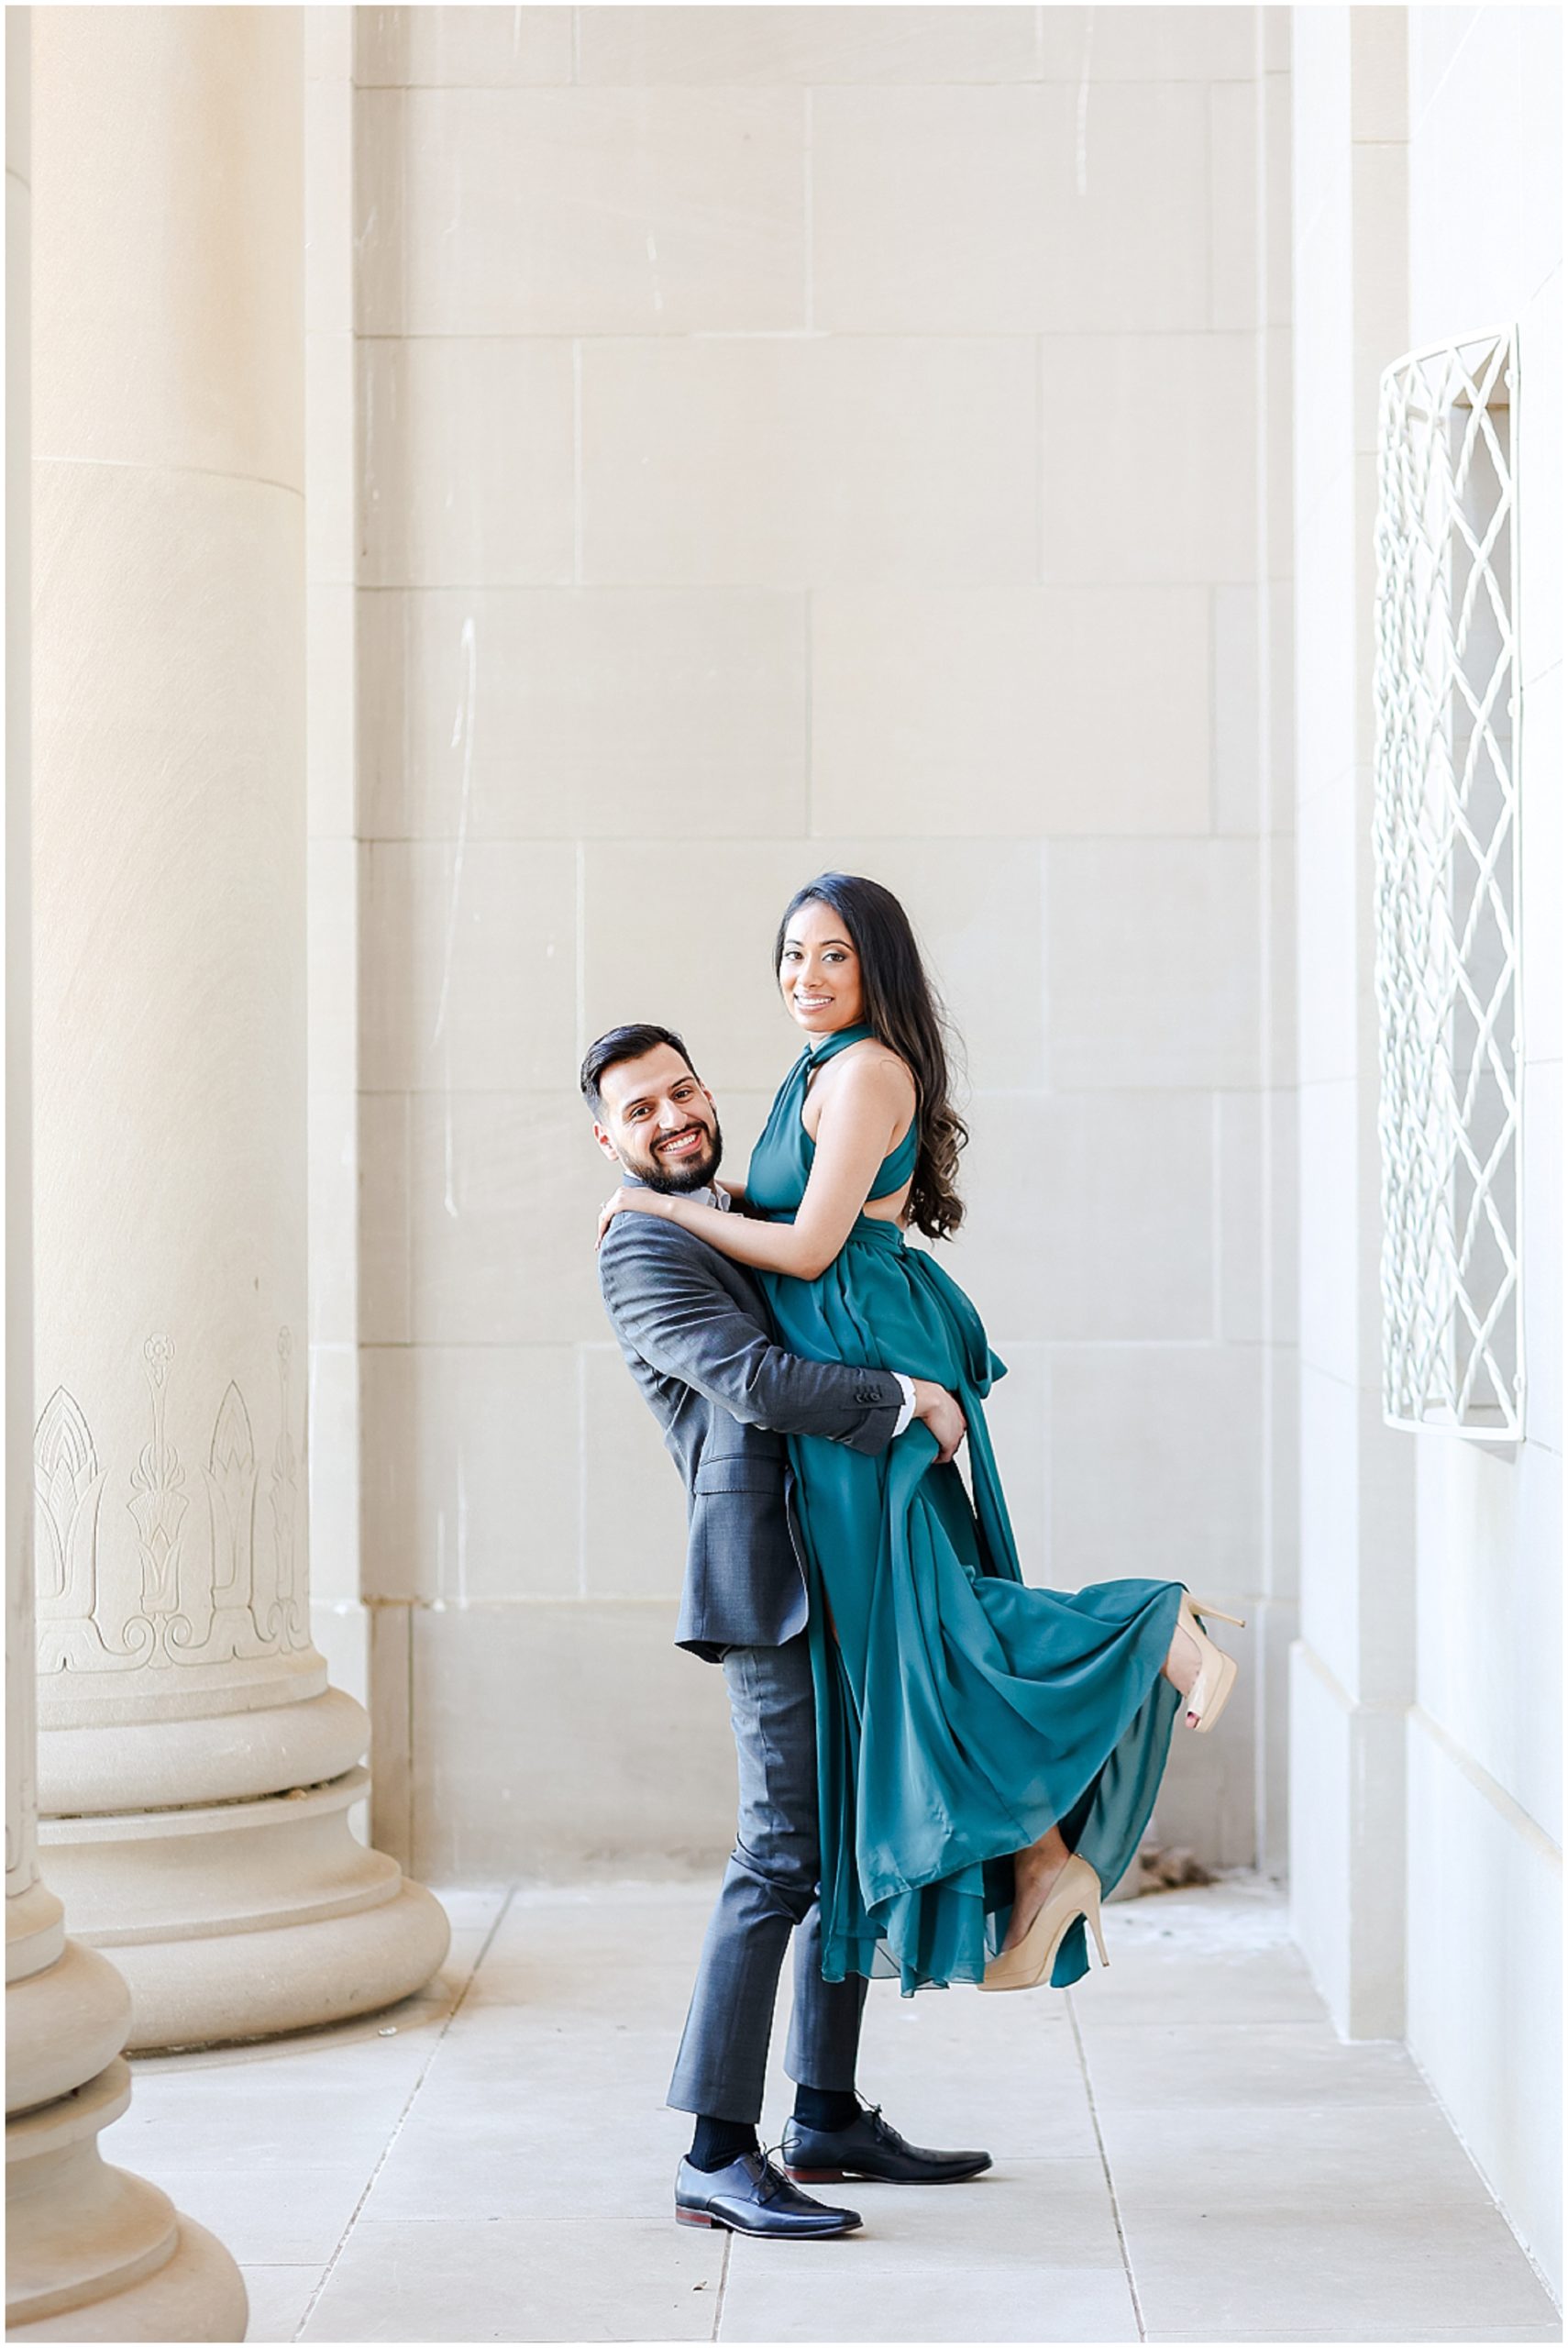 Fusion Indian Engagement Photos at Kansas City Nelson Atkins Museum for Bryant & Kaman - Mariam Saifan Photography - Where to take Engagement Photos - What to Wear to Engagement Session - Style Guide - Best Indian Wedding Photography Kansas City and STL - The Lift Wedding Poses 